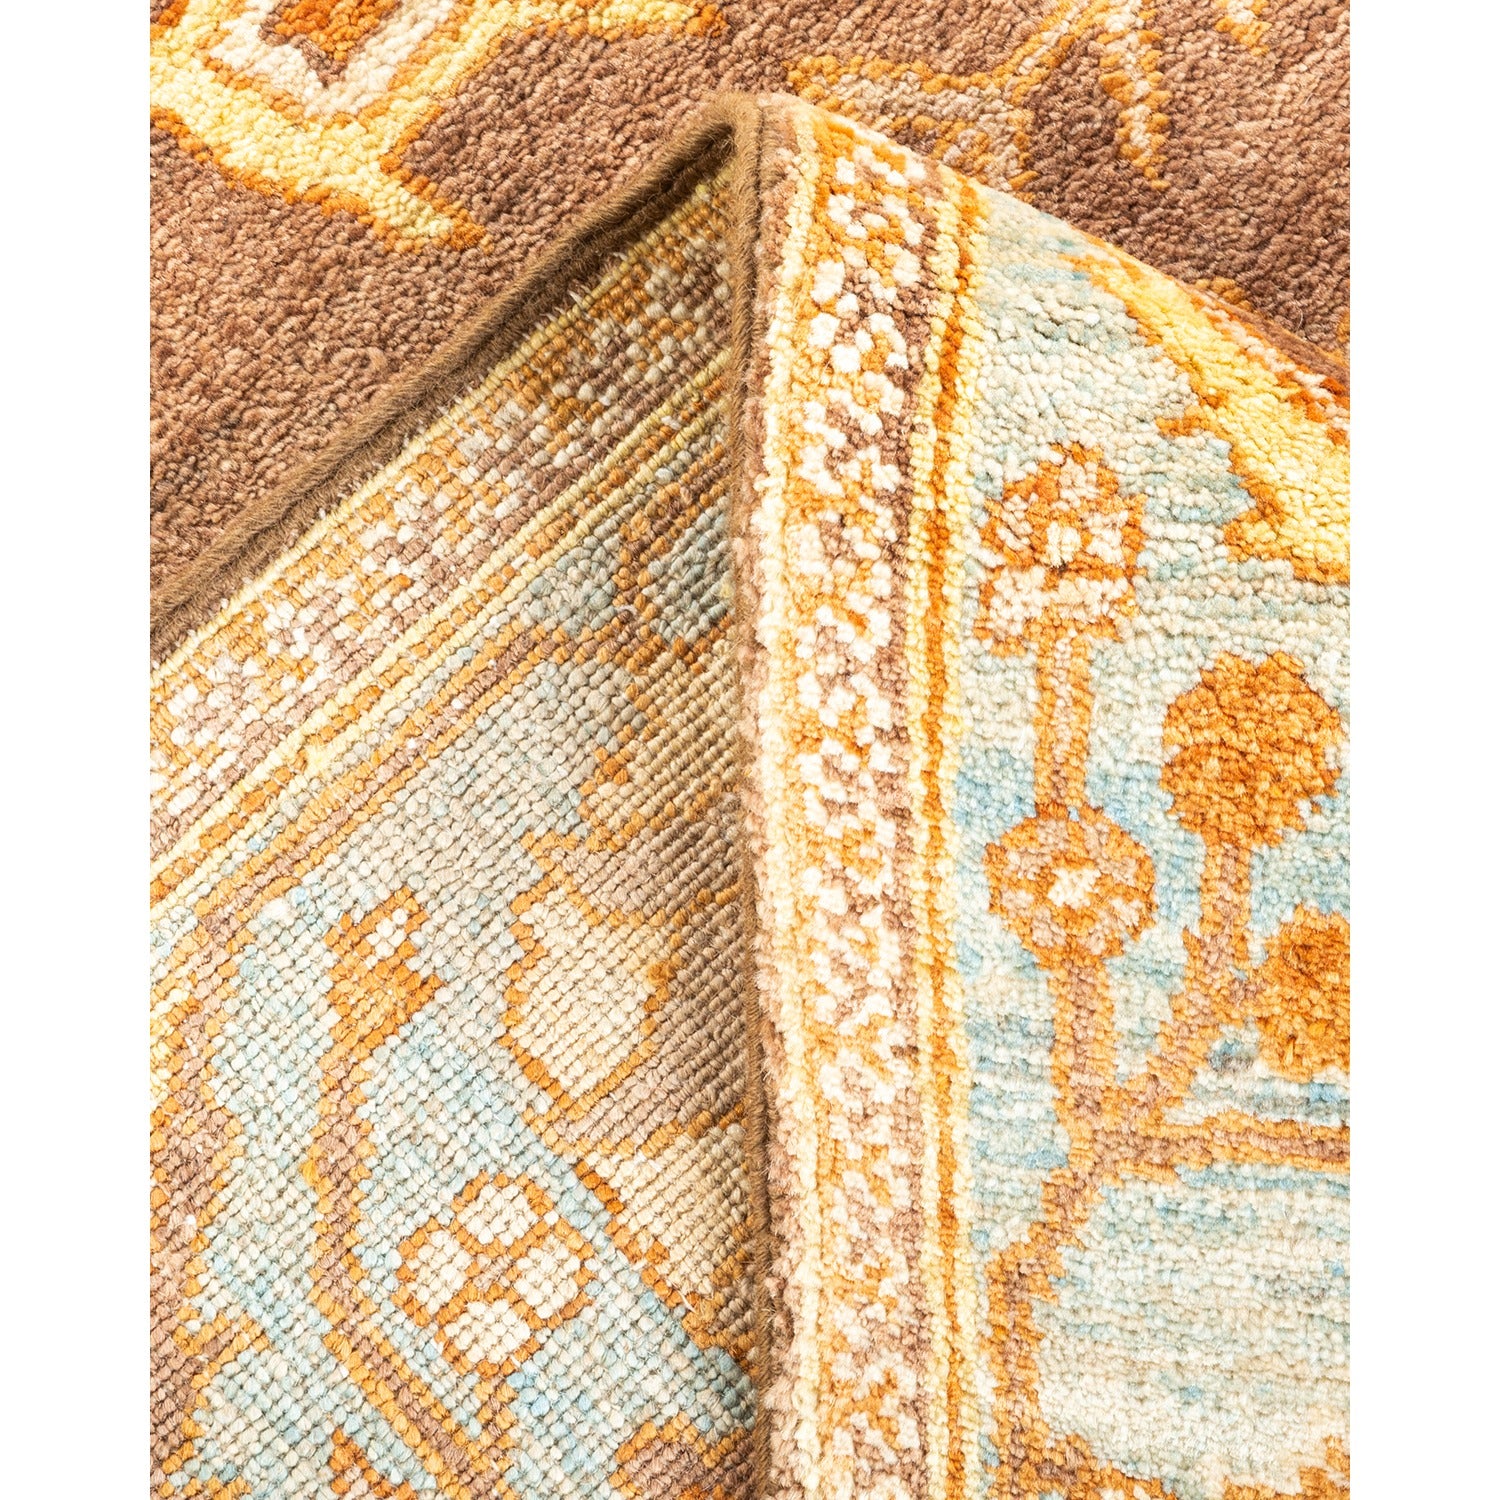 Close-up of folded rug with floral pattern, earthy colors and plush texture.